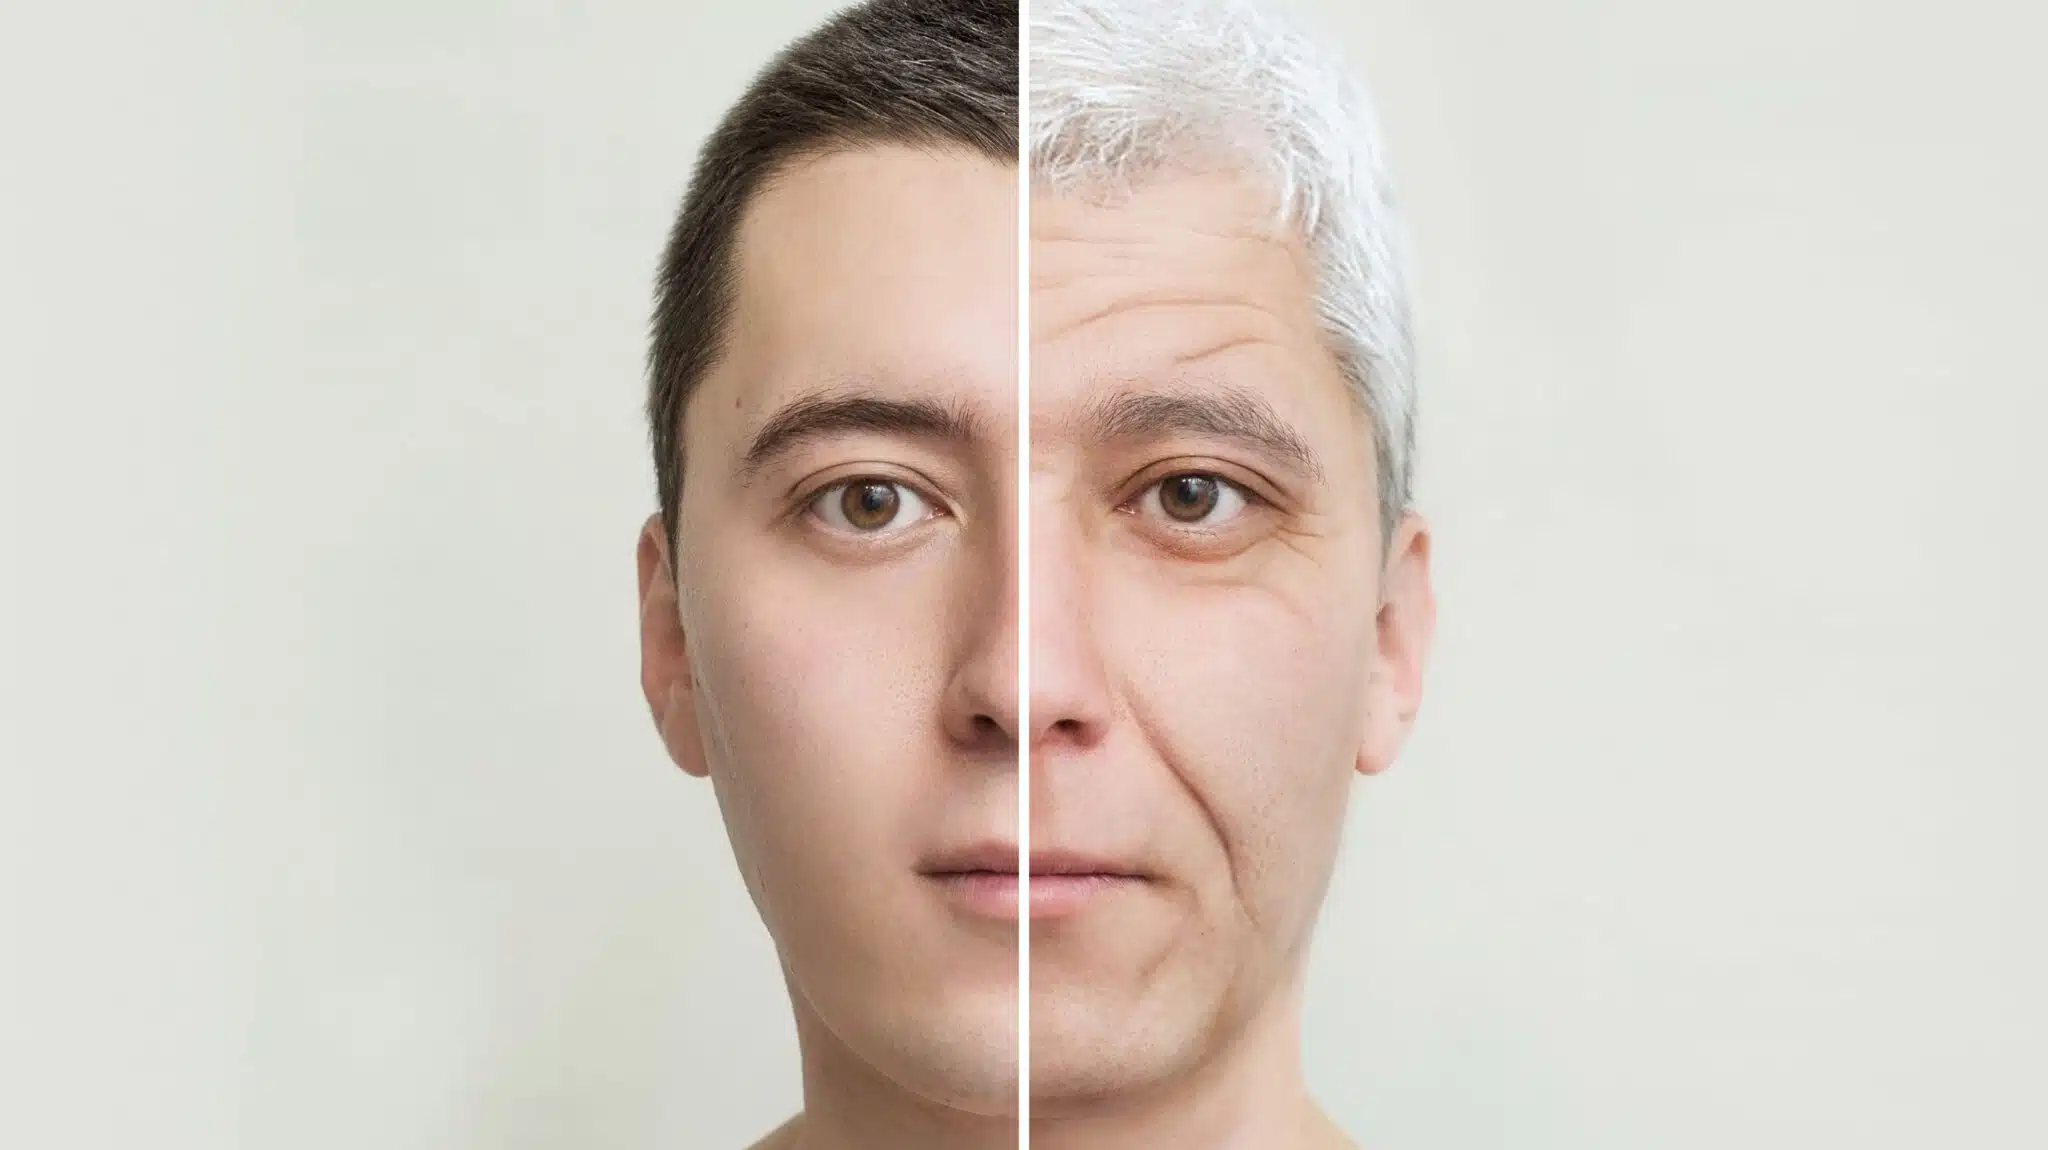 A man's face, half young and half aged - Does Drug And Alcohol Abuse Speed Up The Aging Process